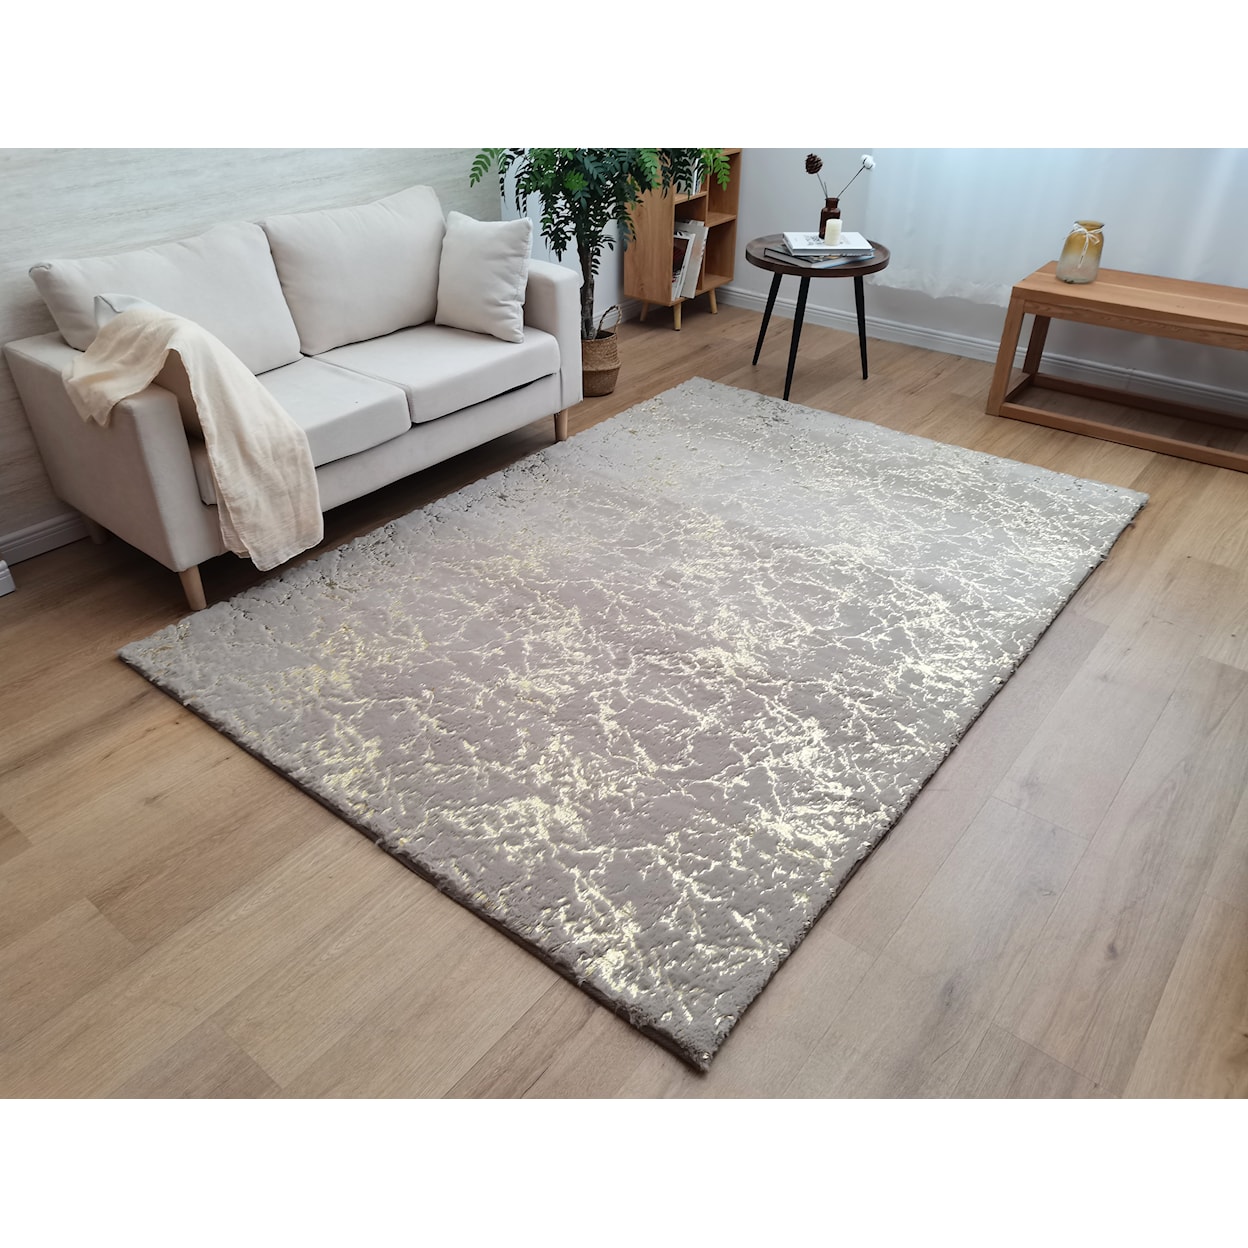 Zinatex Timmy Shaggy S Edition TAUPE GOLD 7X10 AREA RUG |